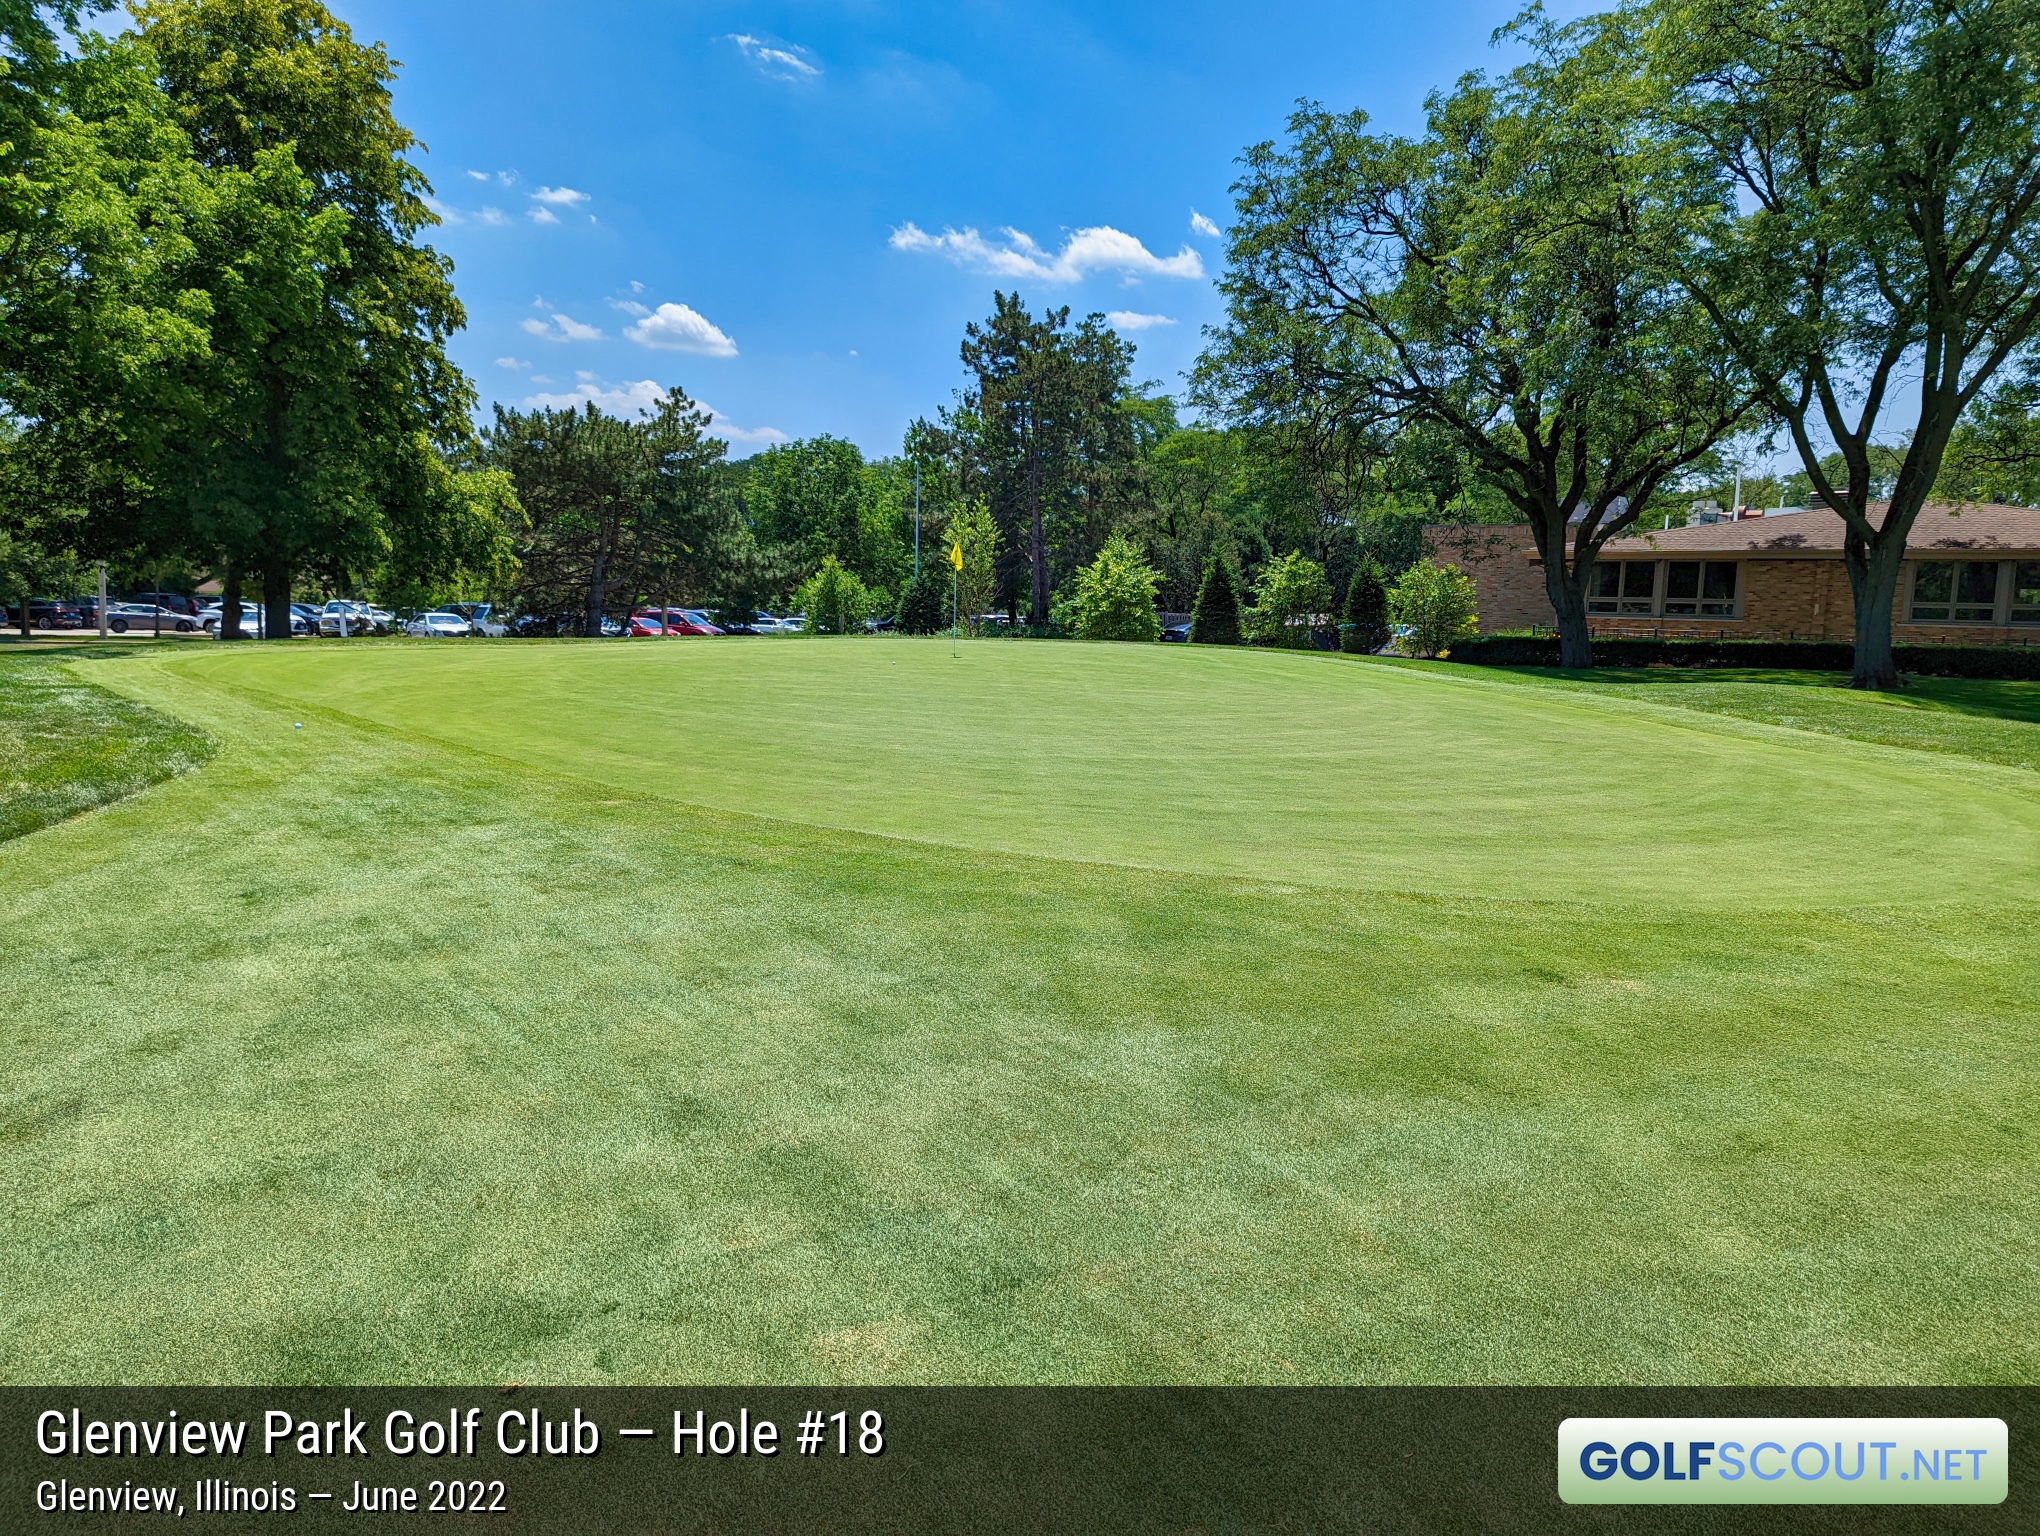 Photo of hole #18 at Glenview Park Golf Club in Glenview, Illinois. 